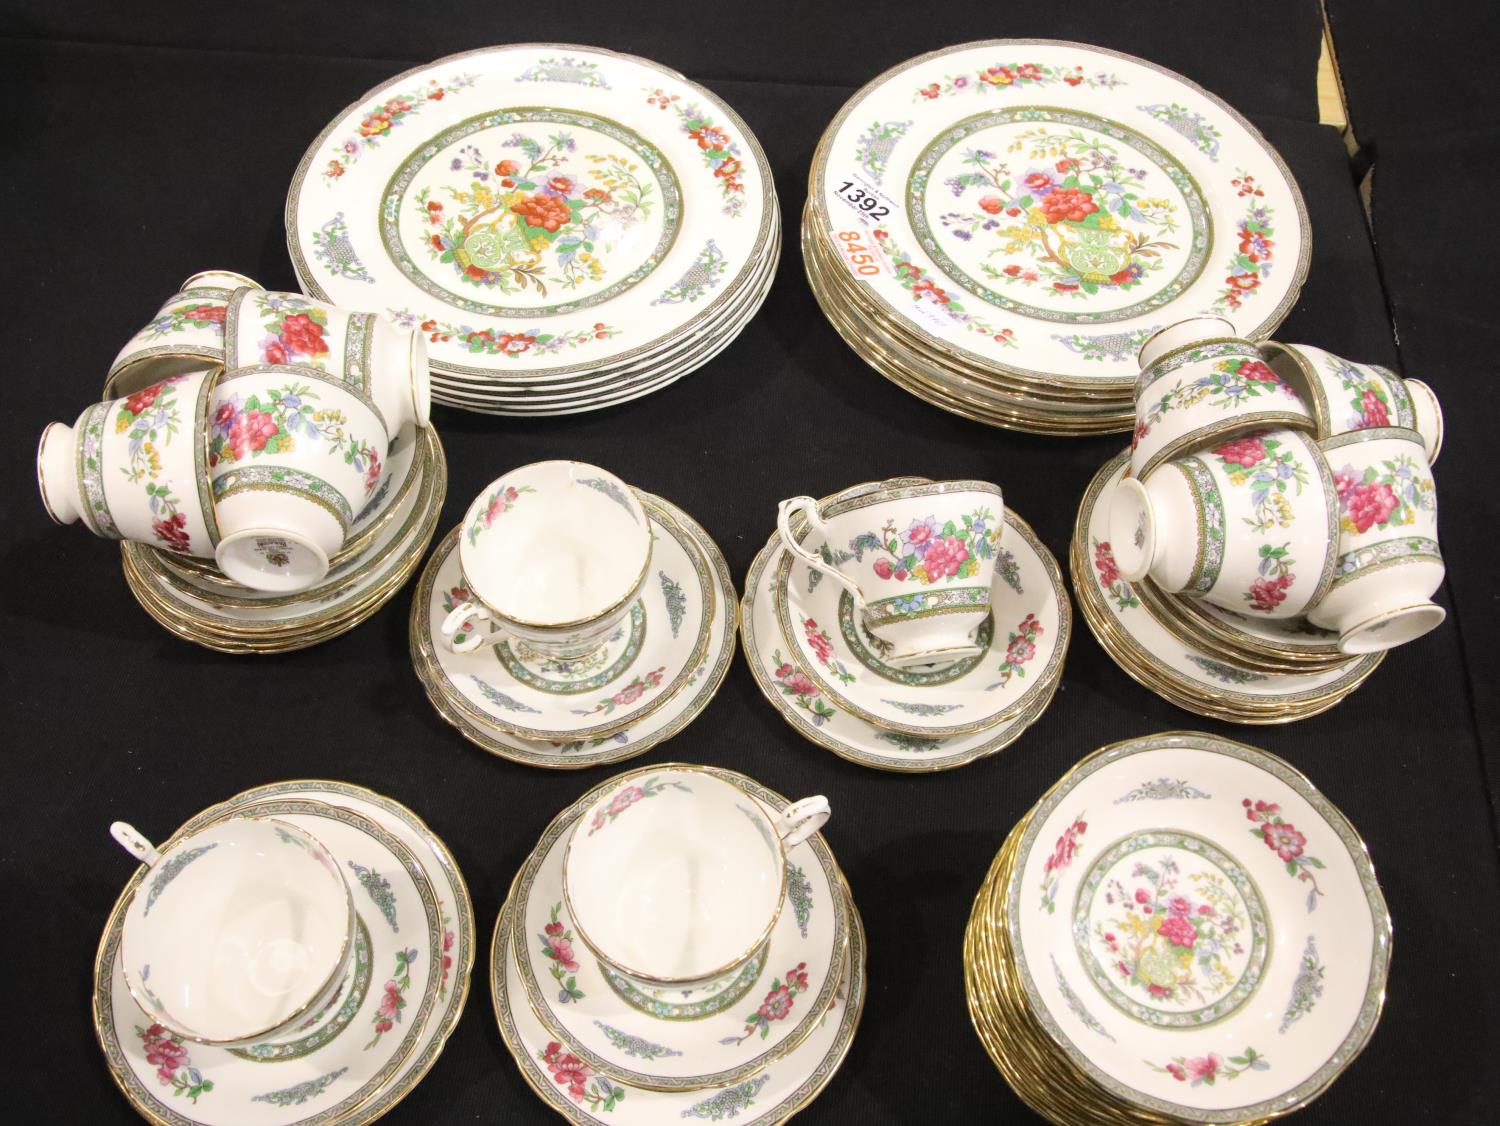 Paragon Tree of Kashmir pattern dinner service including dinner plates, salad plates, bowls cups and